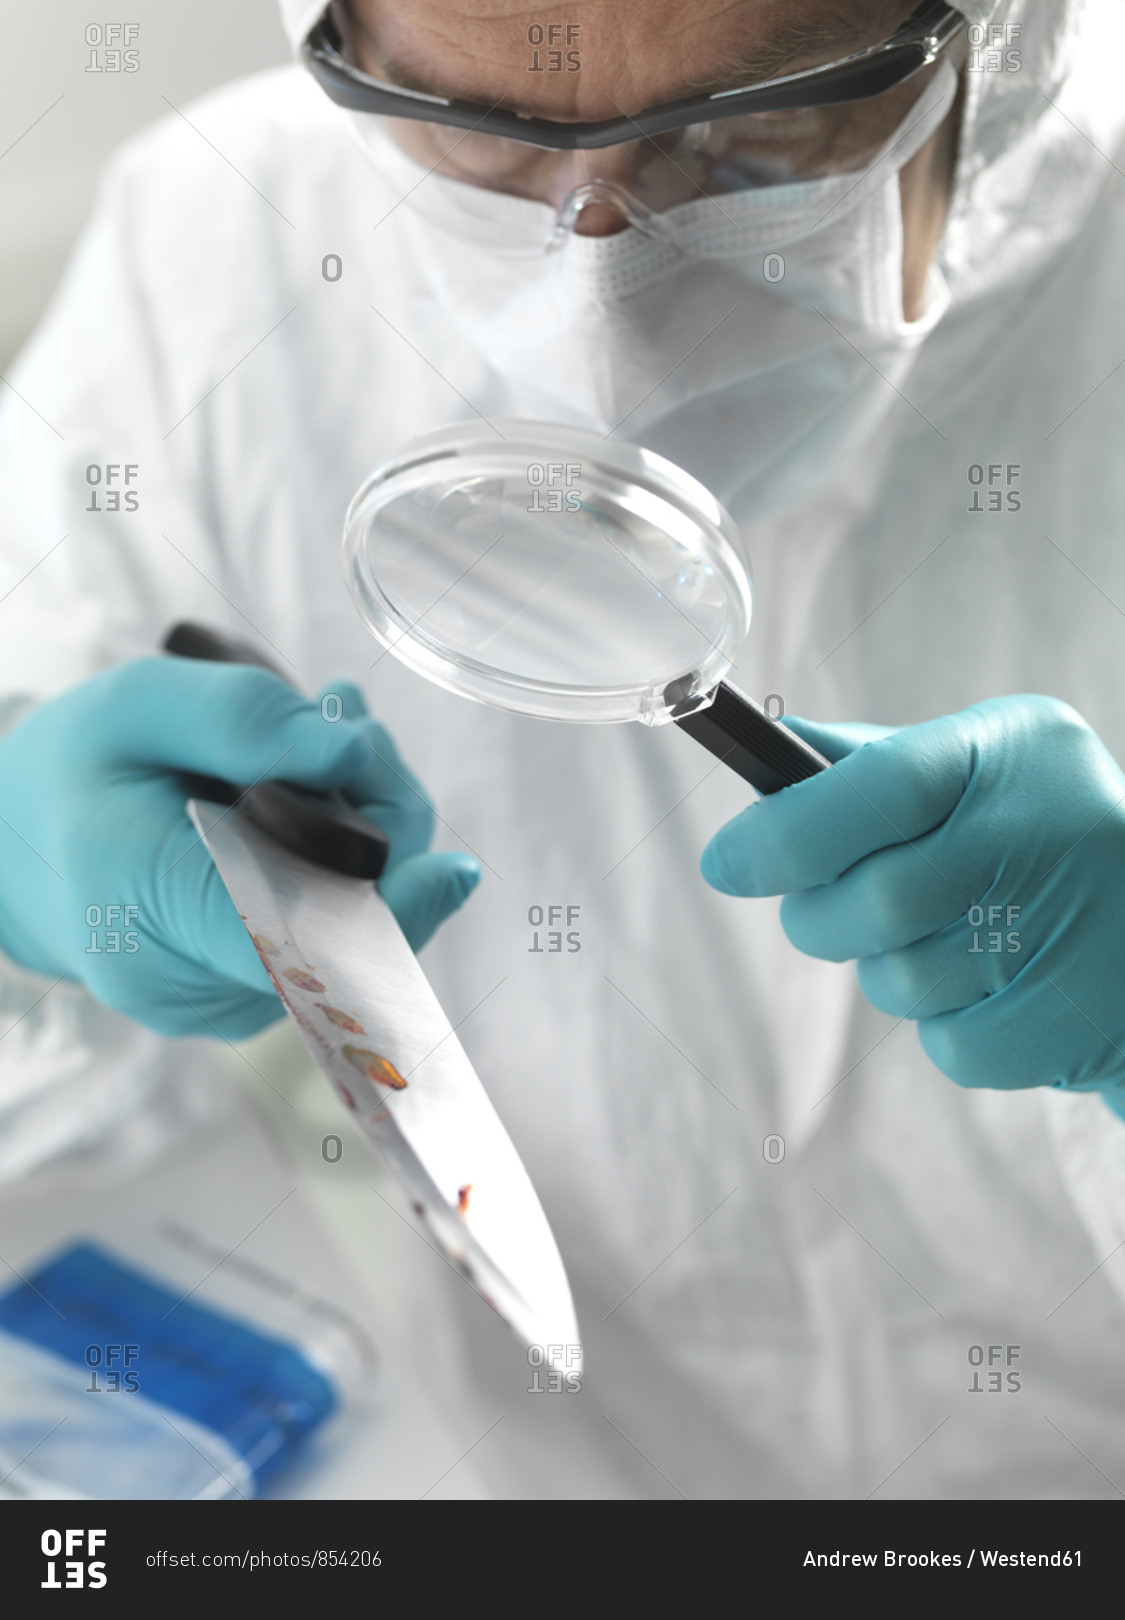 Forensic scientist examining a knife taken from a violent crime scene in the laboratory